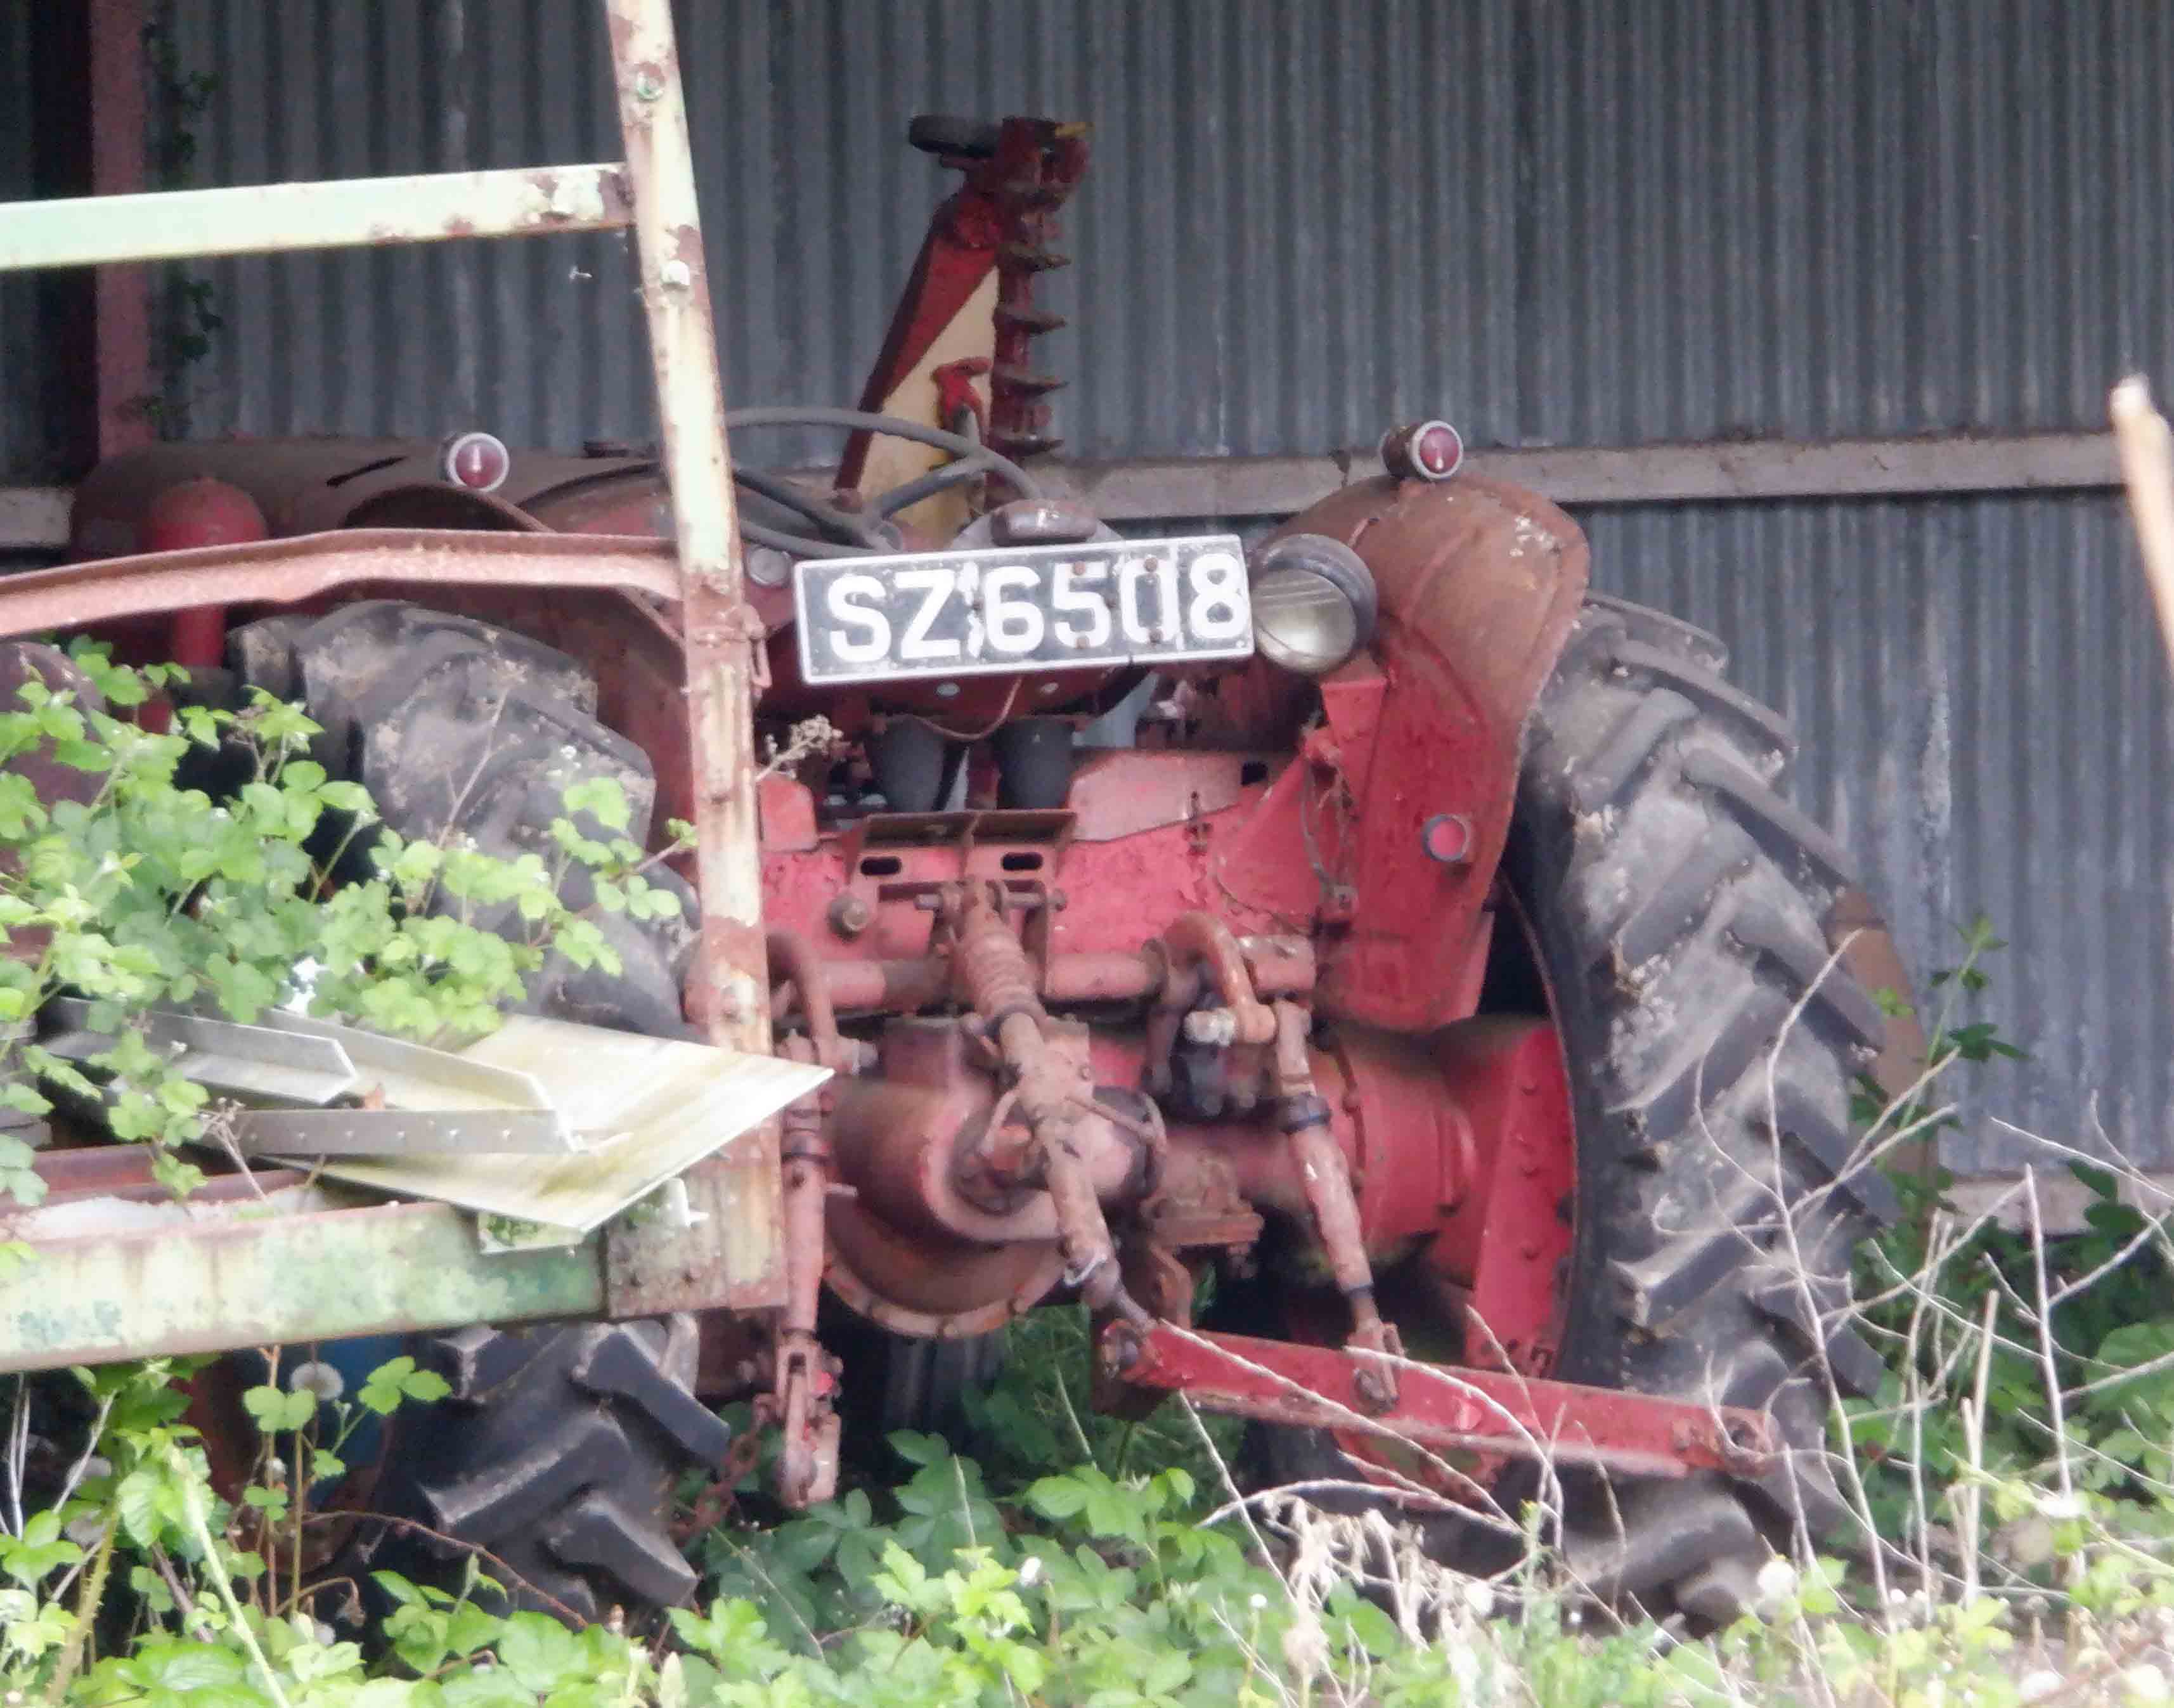 What is the number plate of the old tractor in the barn opposite no. 20?